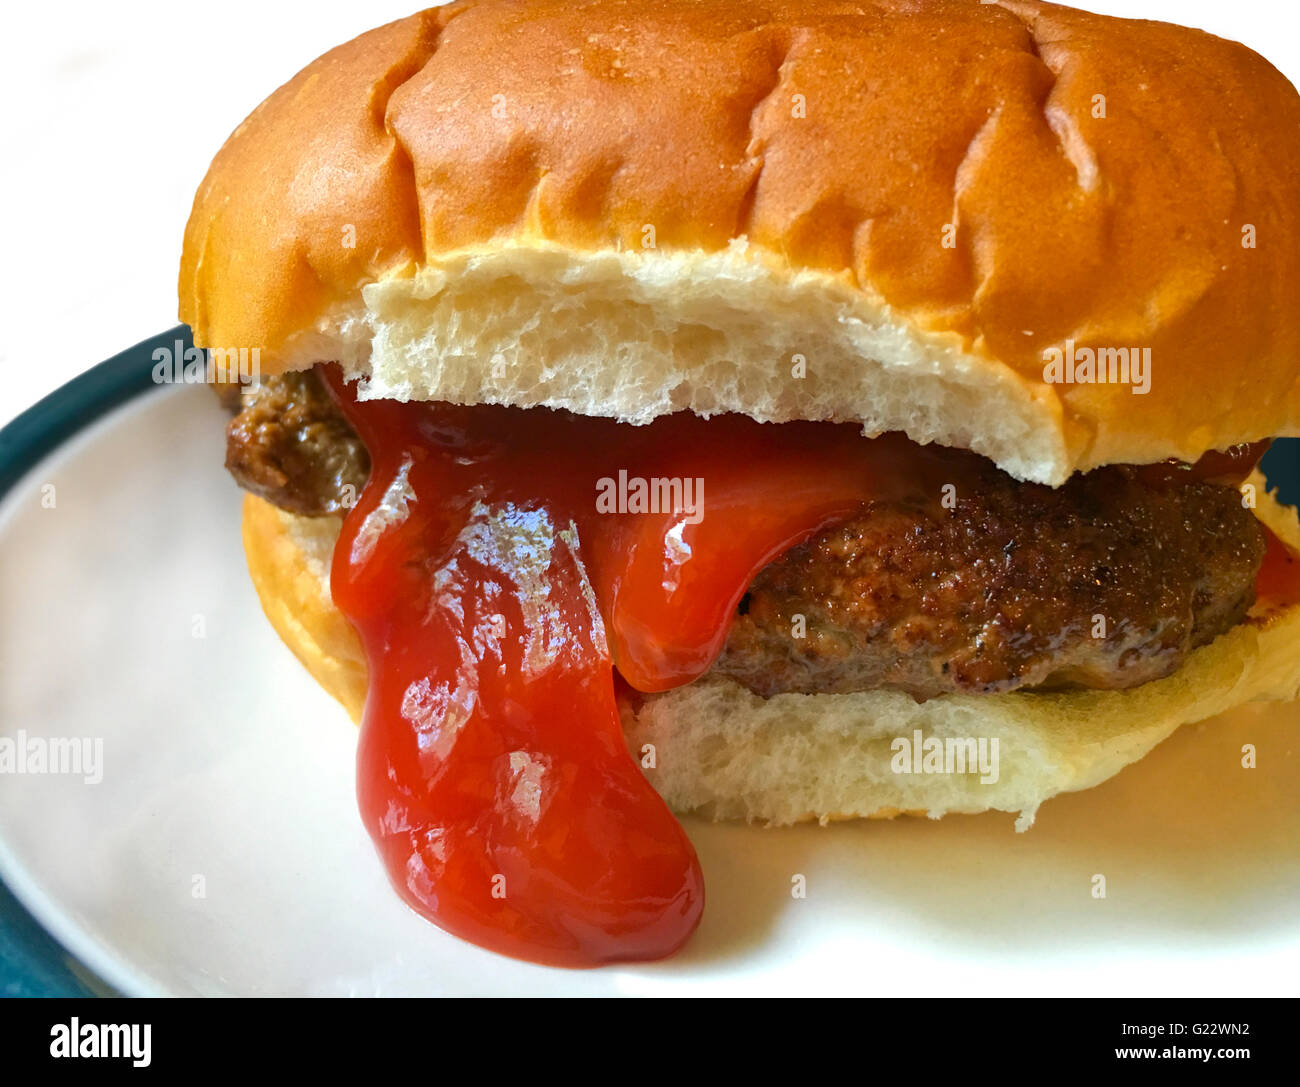 It almost looks like this hamburger in a bun is sticking out it's tongue. Stock Photo